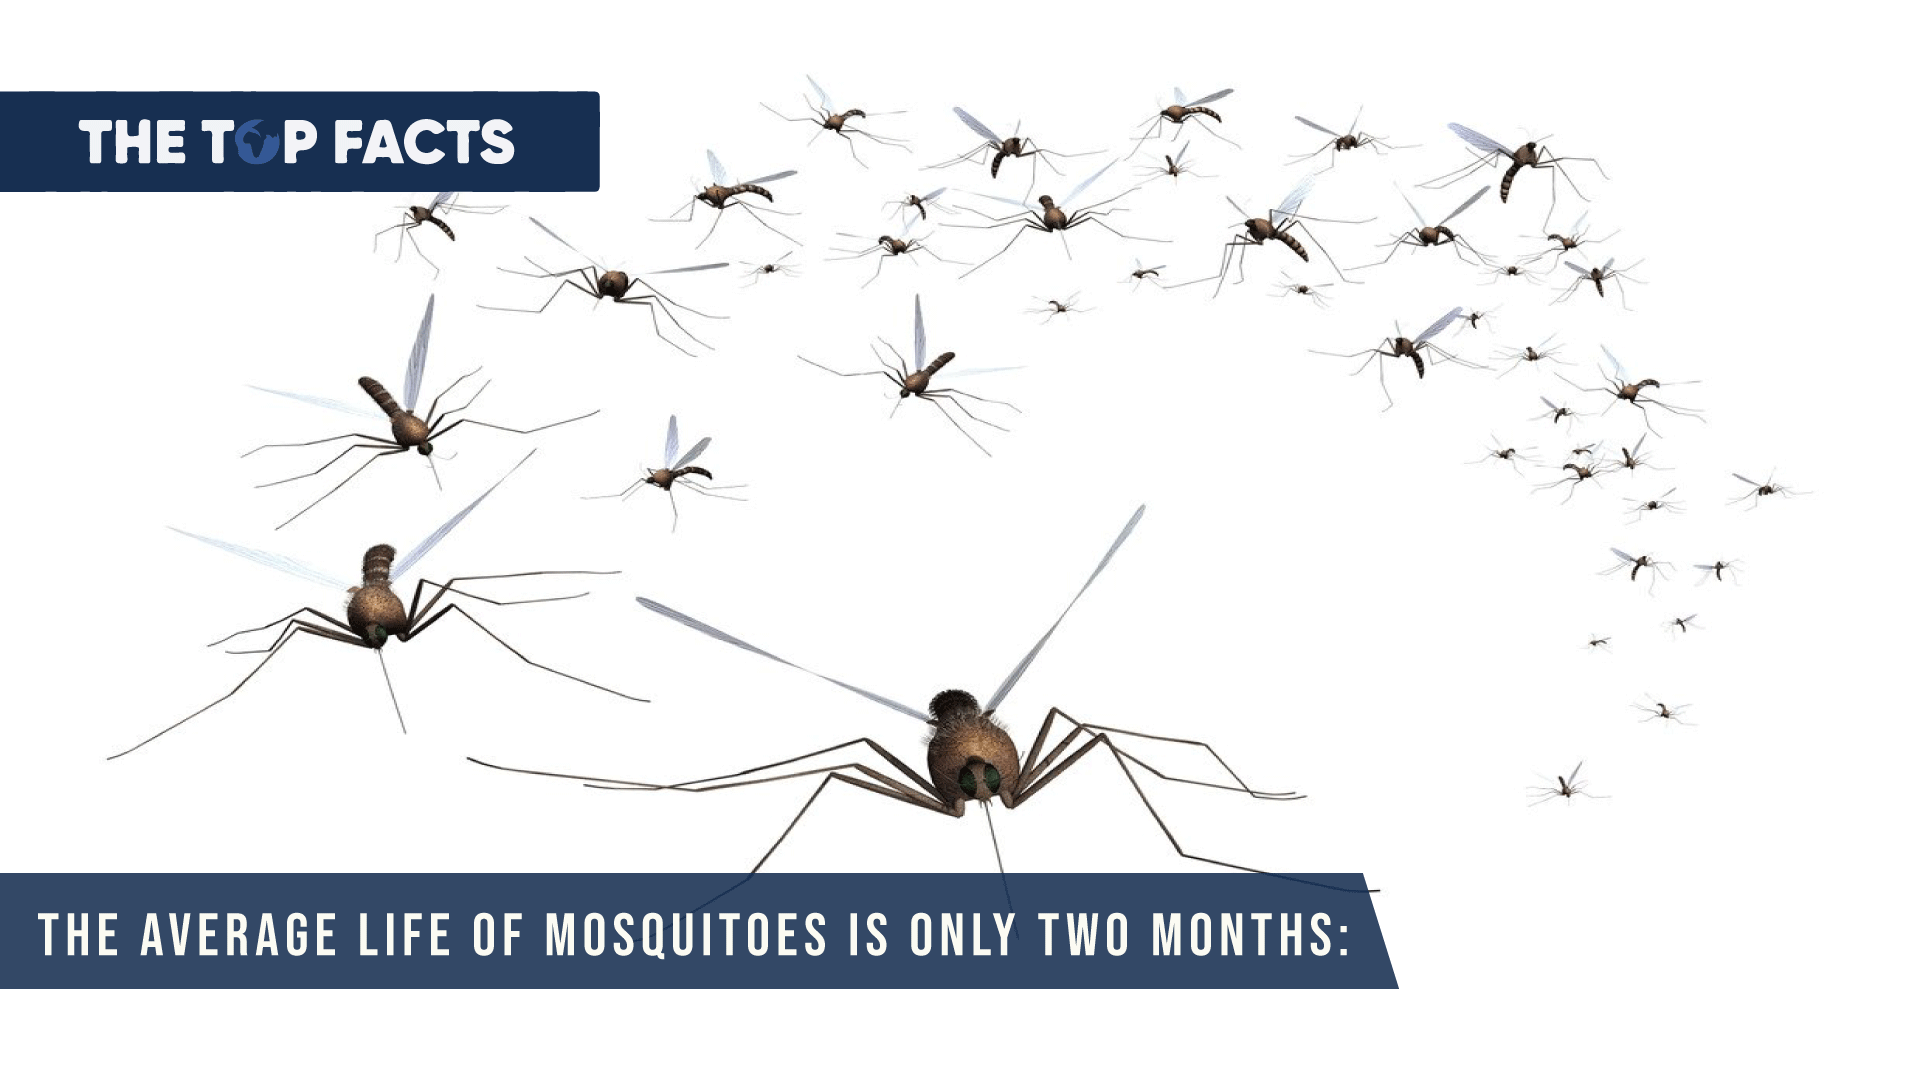 The average life of mosquitoes is only two months